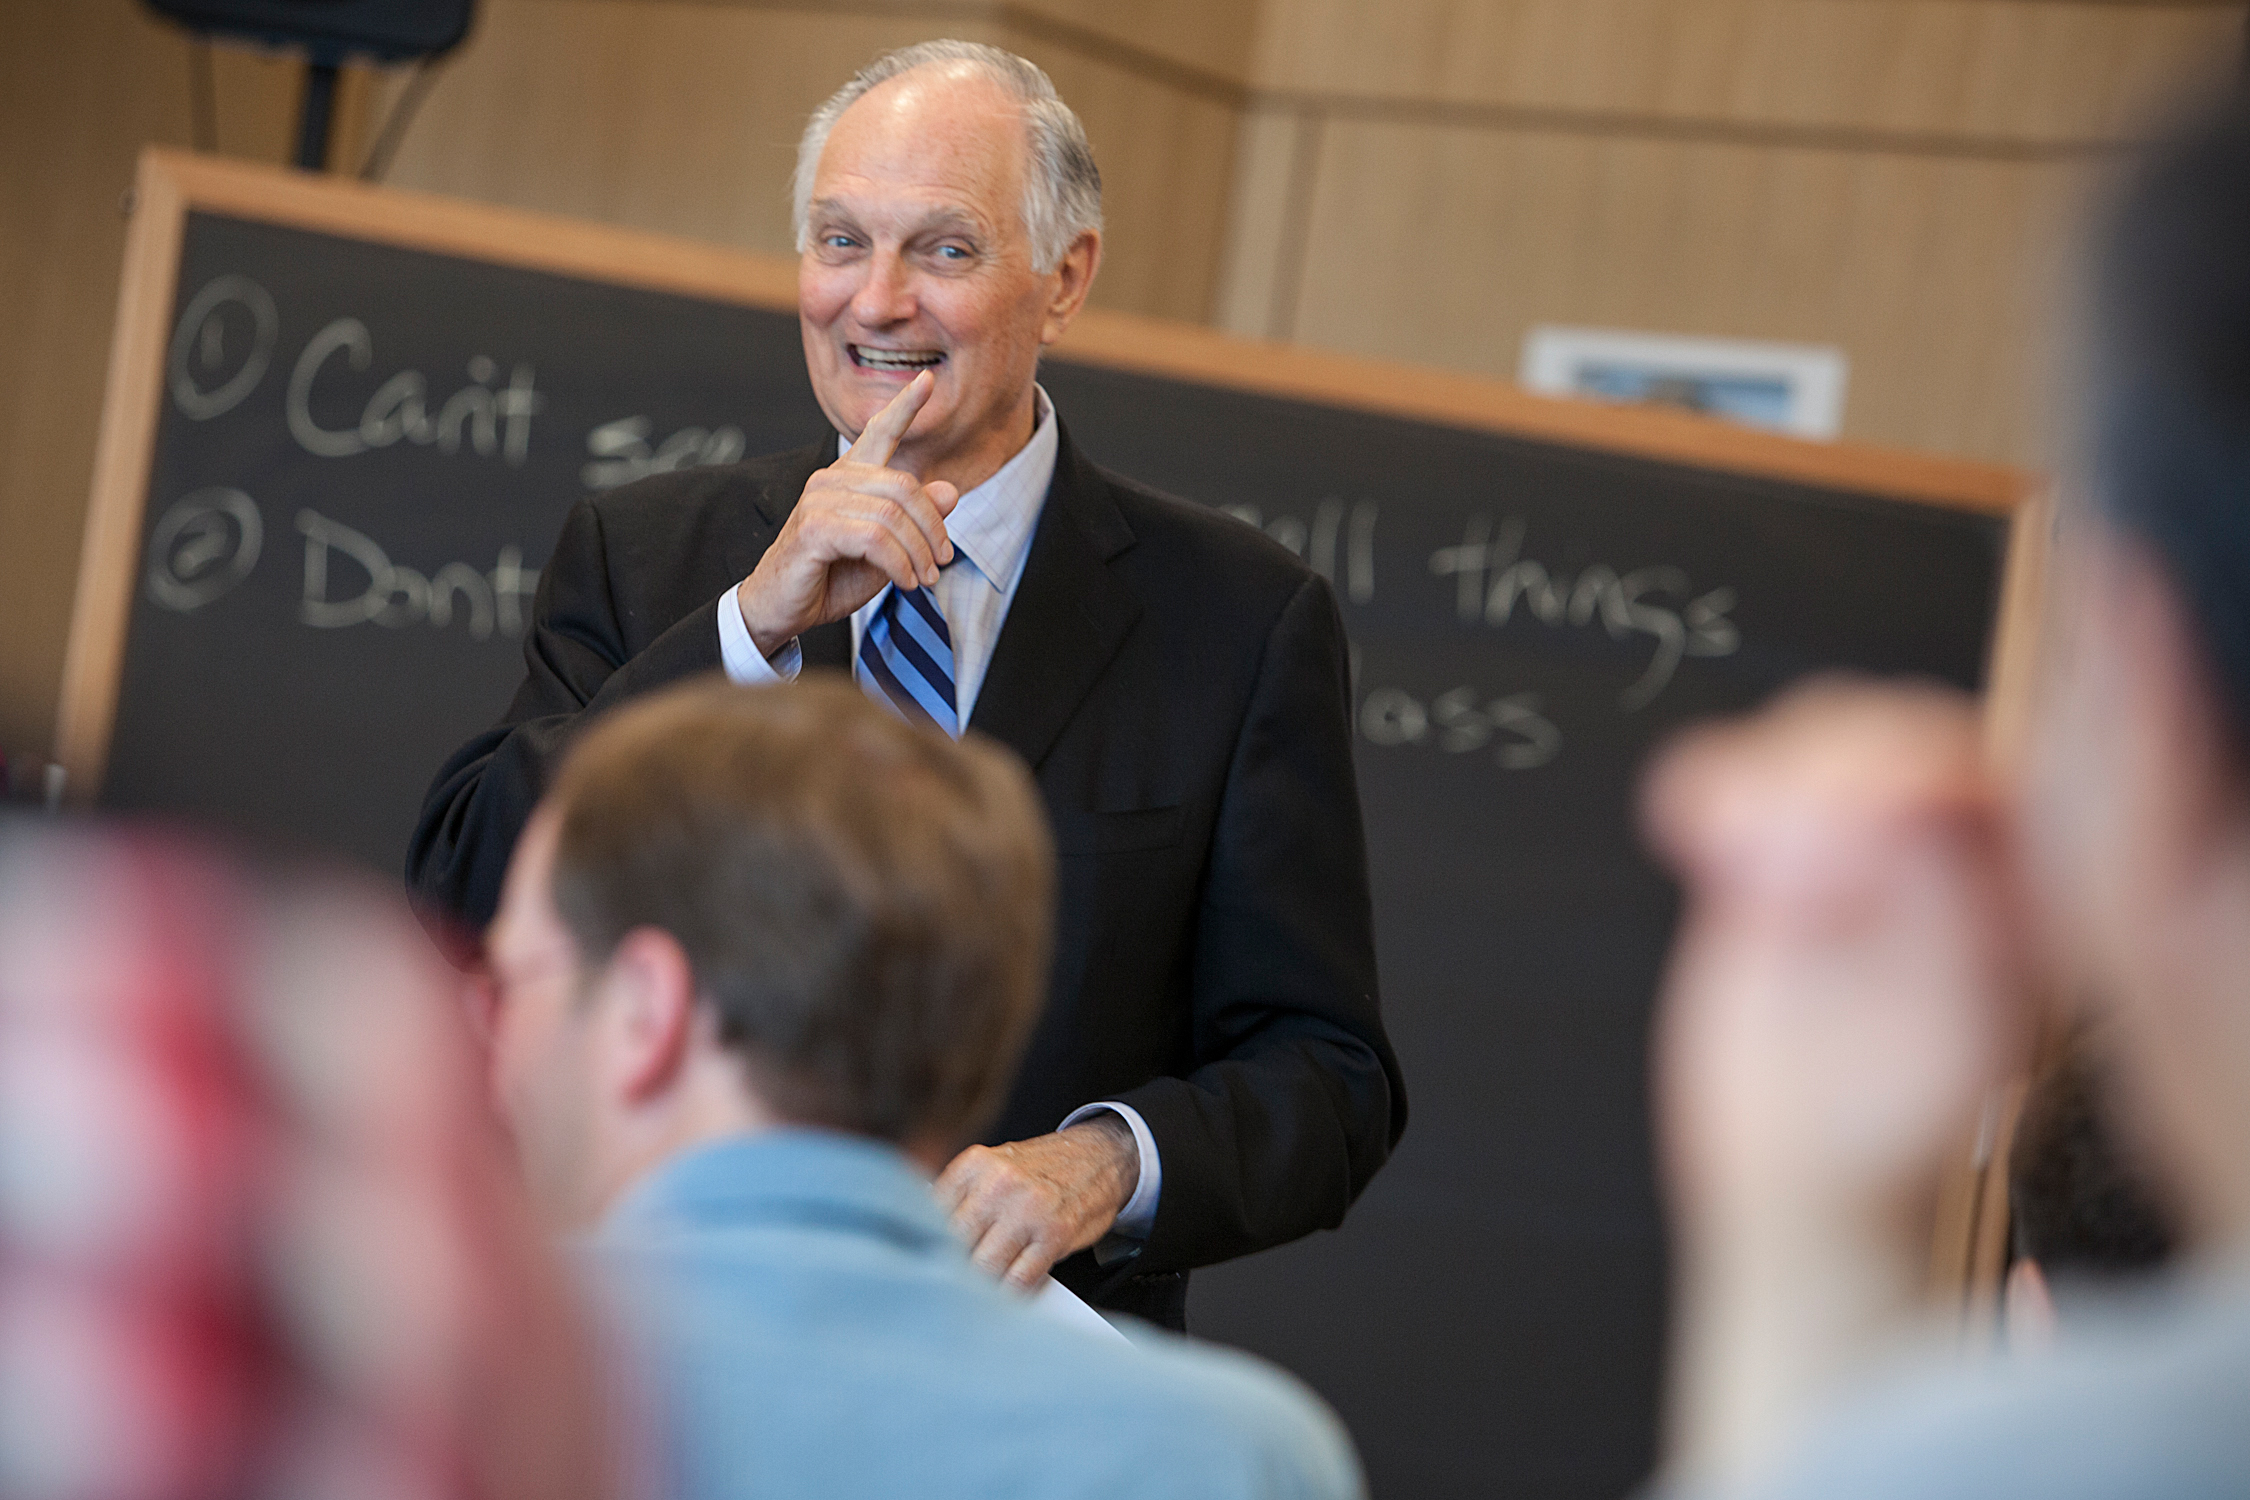 Alan Alda talks to scientists about effective communication during a workshop at Cornell University on May 22, 2014. (Cornell University)